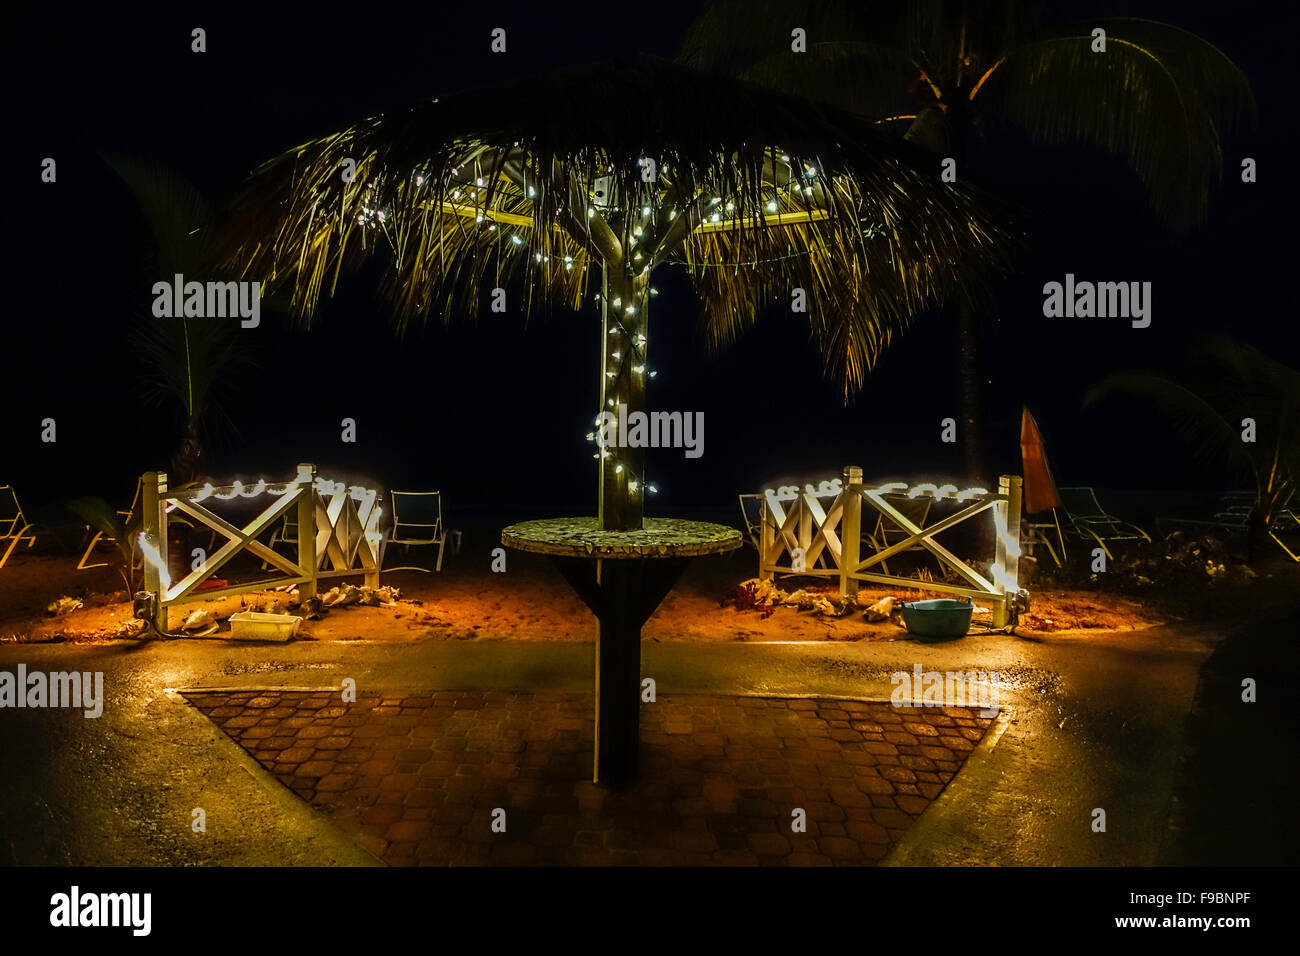 A palapa and fence leading to the beach are lit up with sparkly white lights at night on a beach resort on St. Croix, U.S. Virgin Islands. Stock Photo